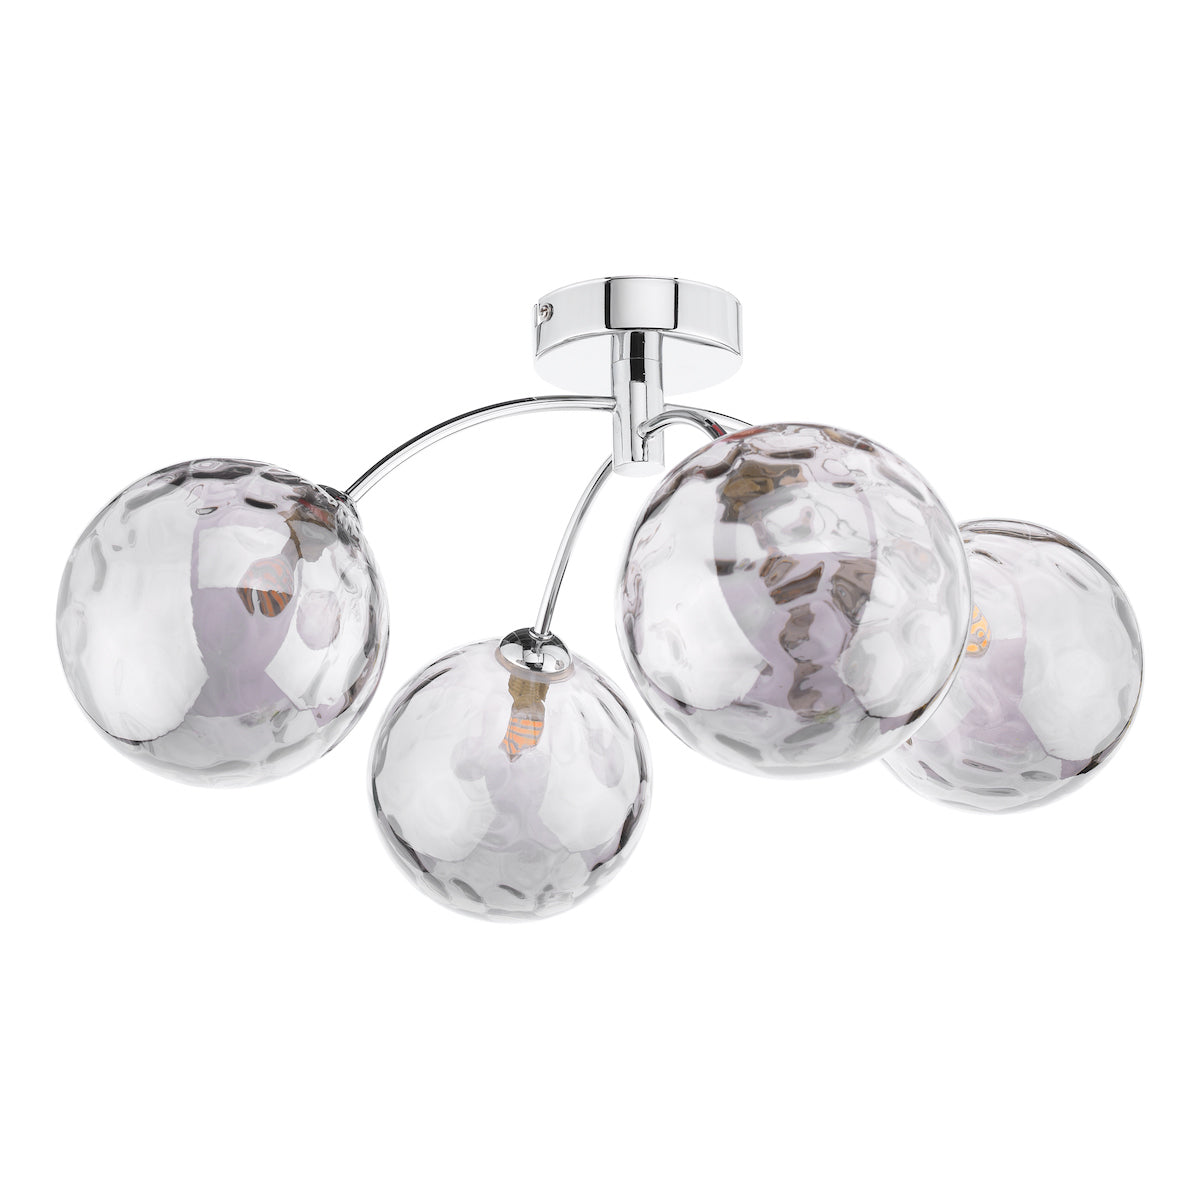 DIMPLE 4 Light Semi-Flush In Polished Chrome With Smoked Dimpled Glass - ID 12204